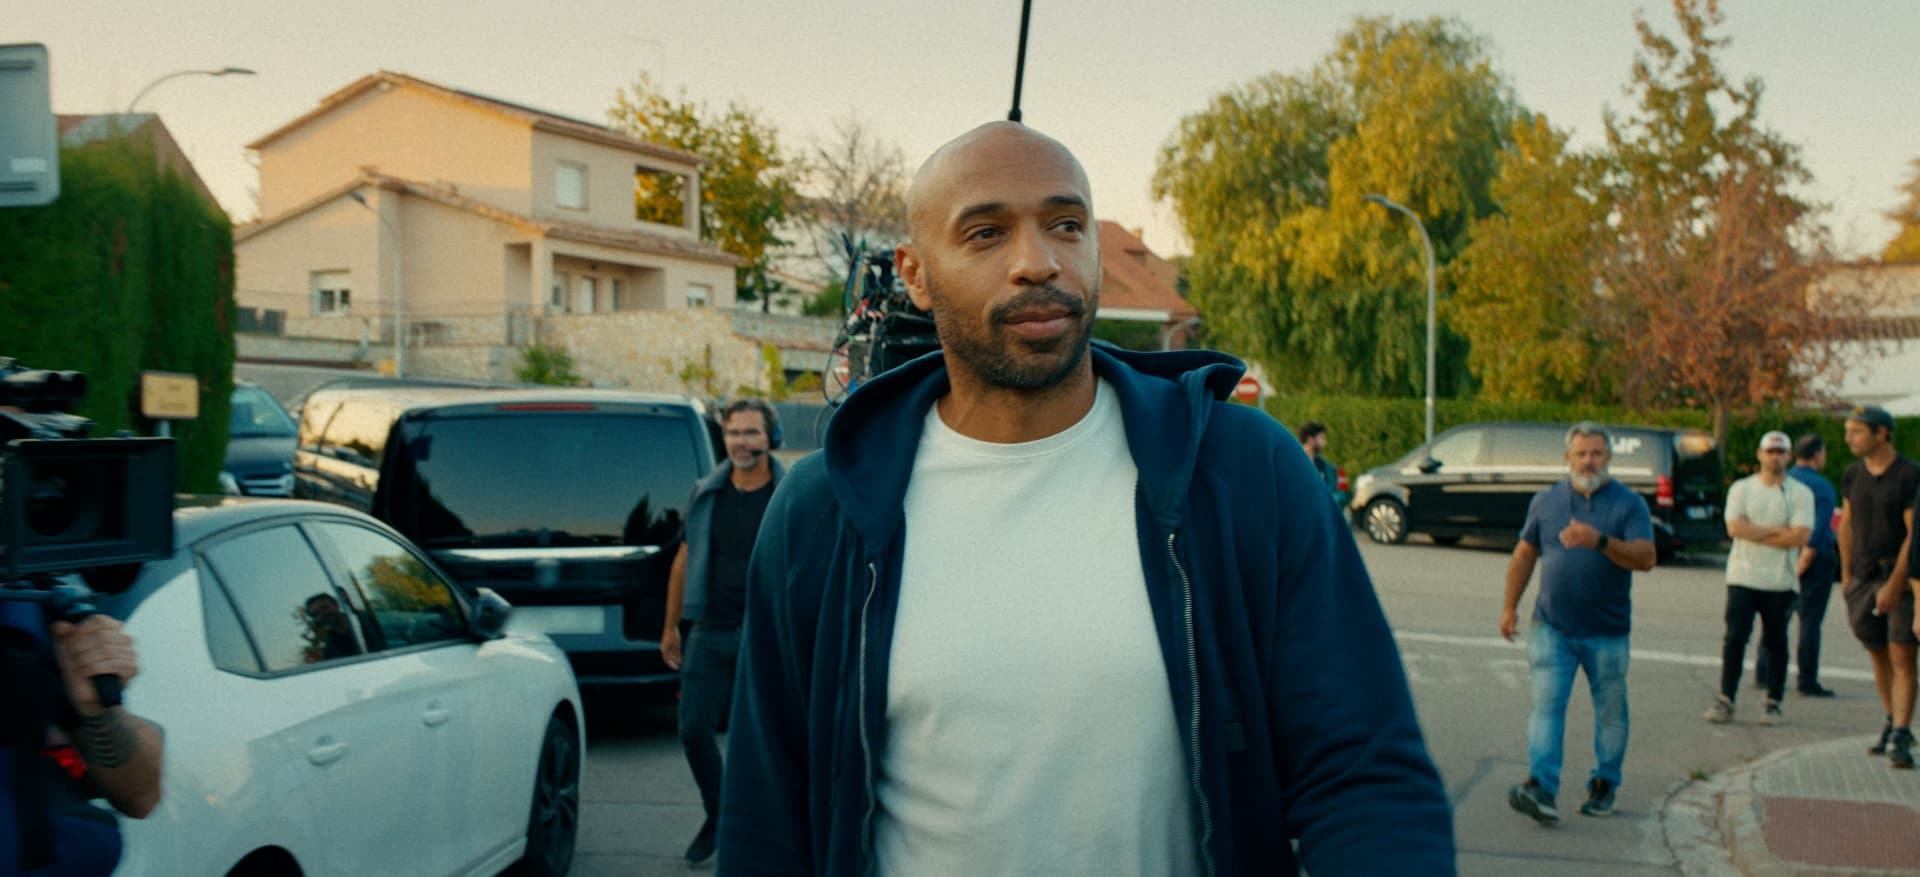 Thierry Visits (ft. Thierry Henry) image